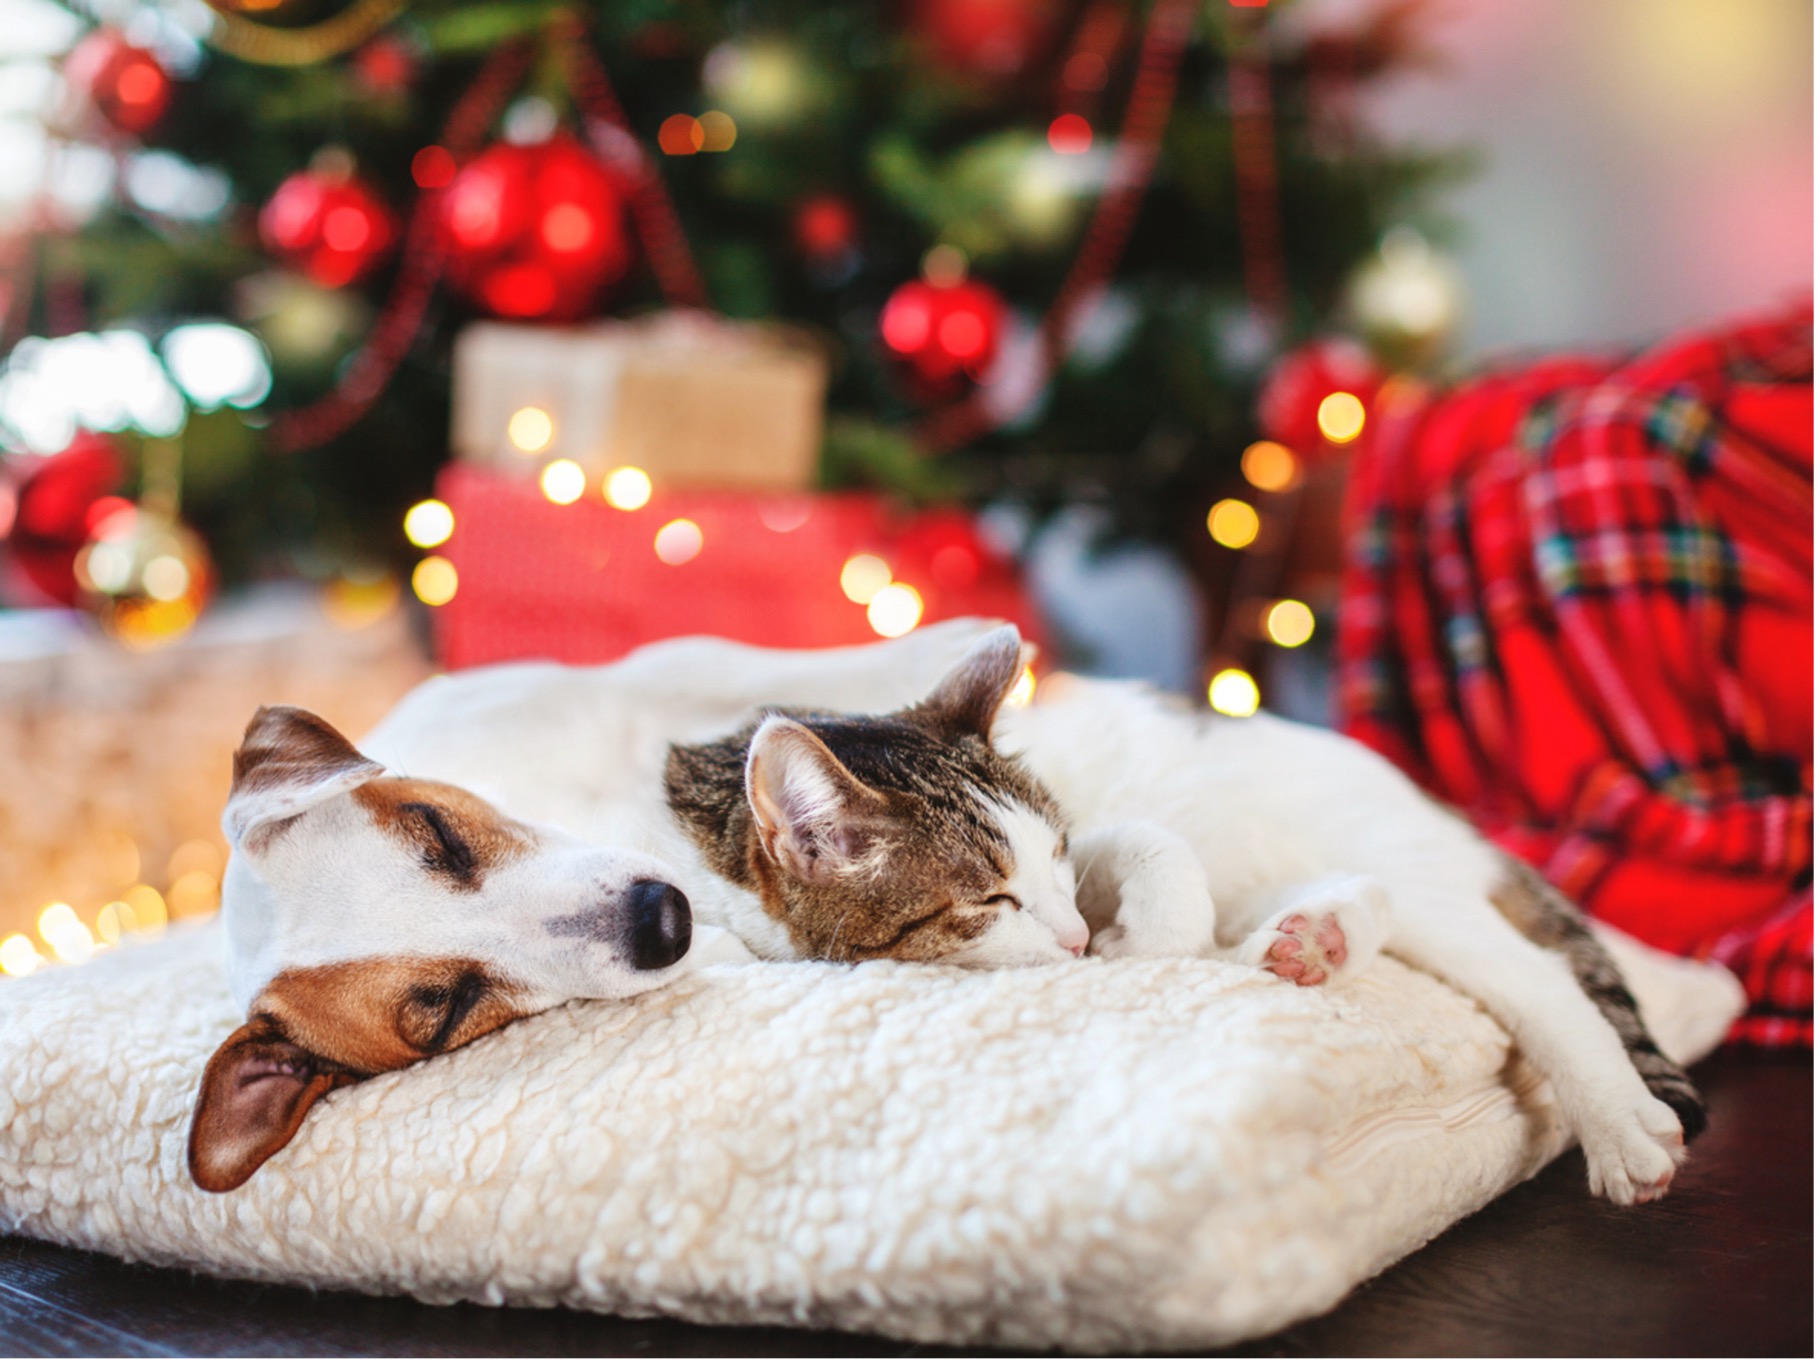 A cat and dog snuggled together on a couch, Christmas tree, presents